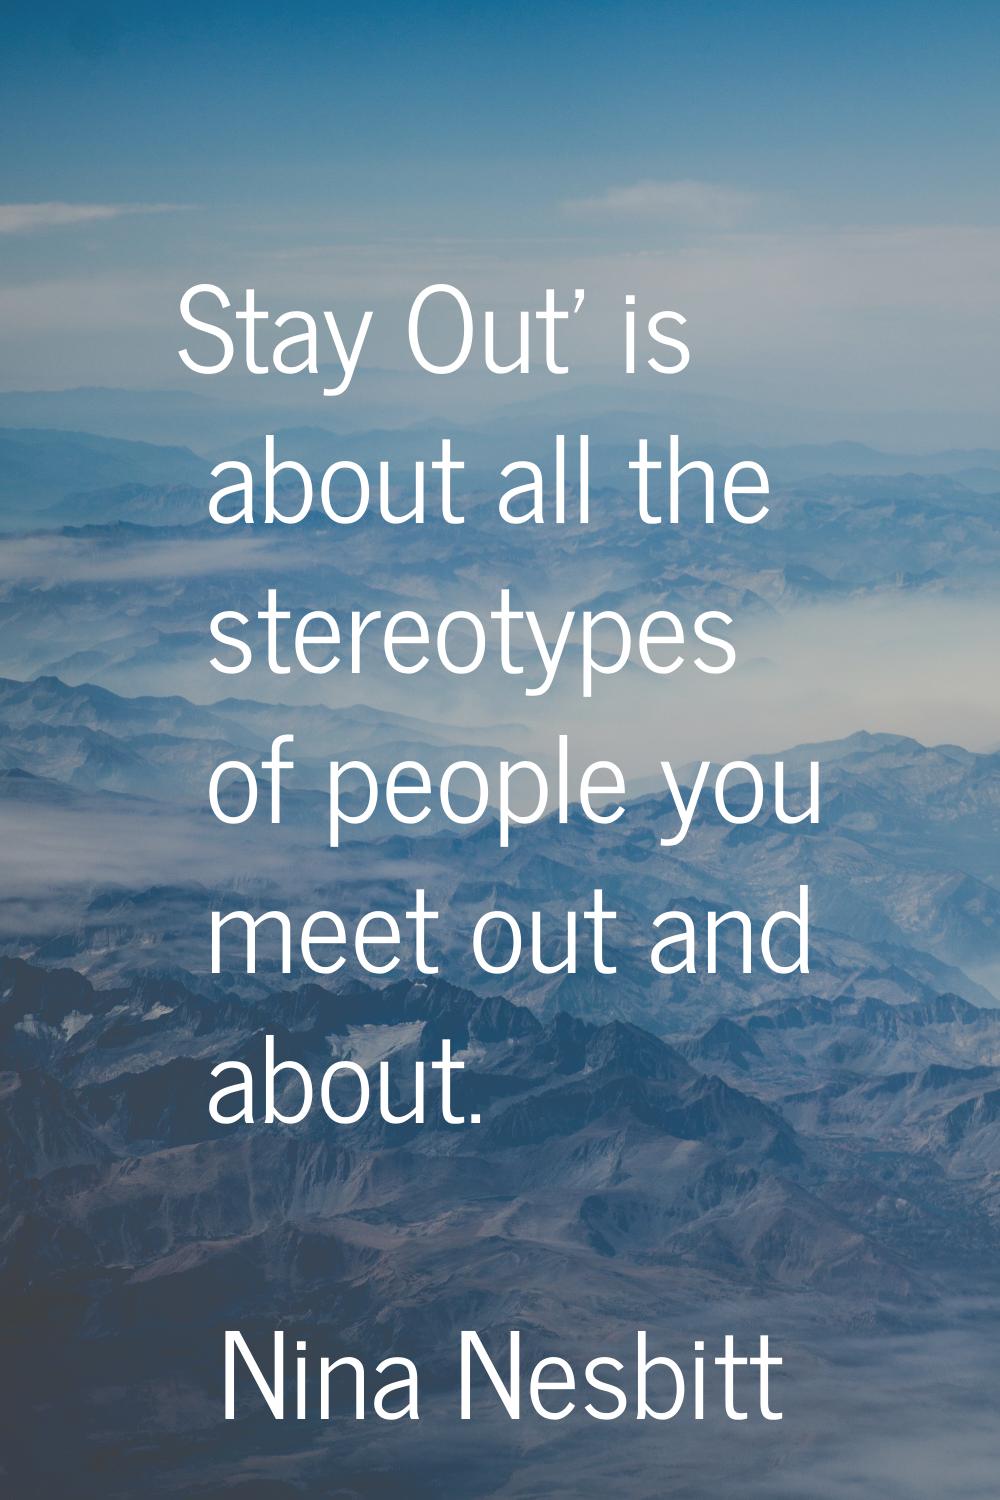 Stay Out' is about all the stereotypes of people you meet out and about.